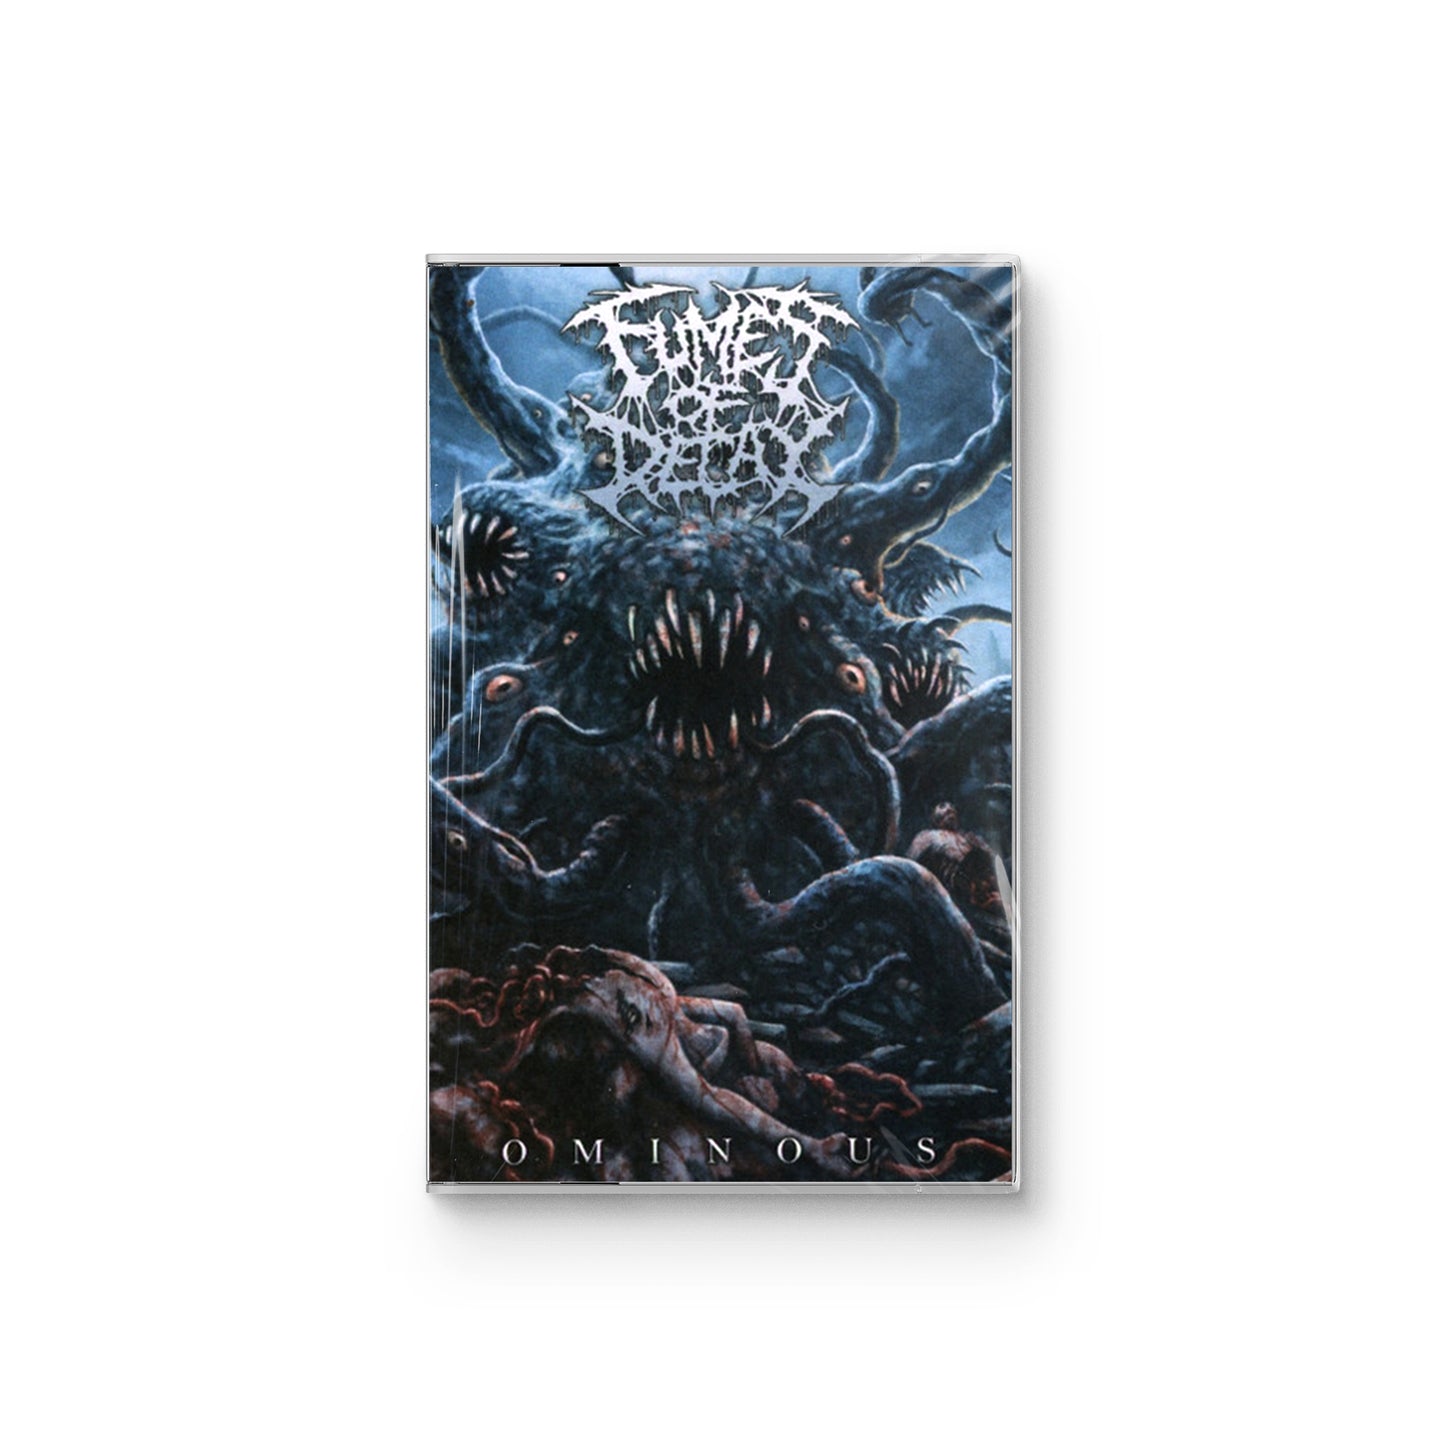 Fumes Of Decay "Ominous" CASSETTE